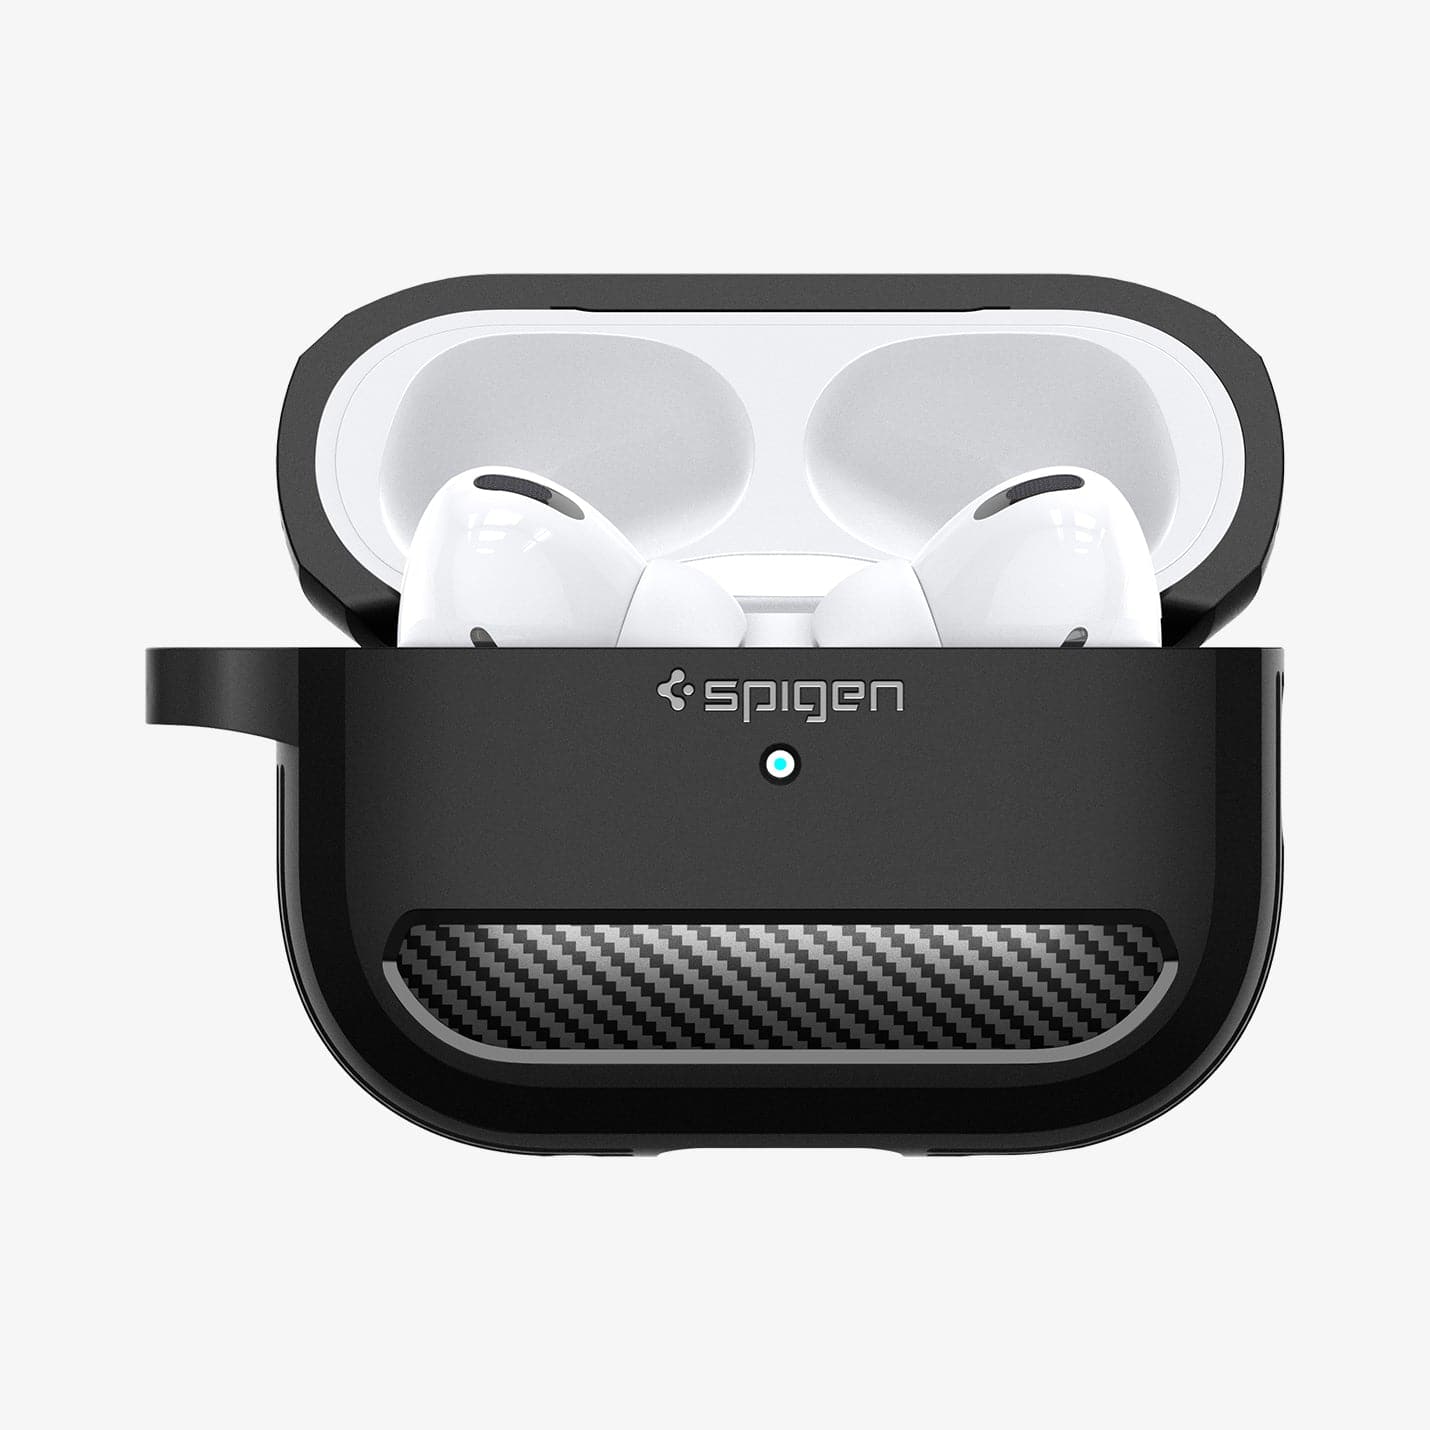 AirPods Pro 2 Rugged Case - Black